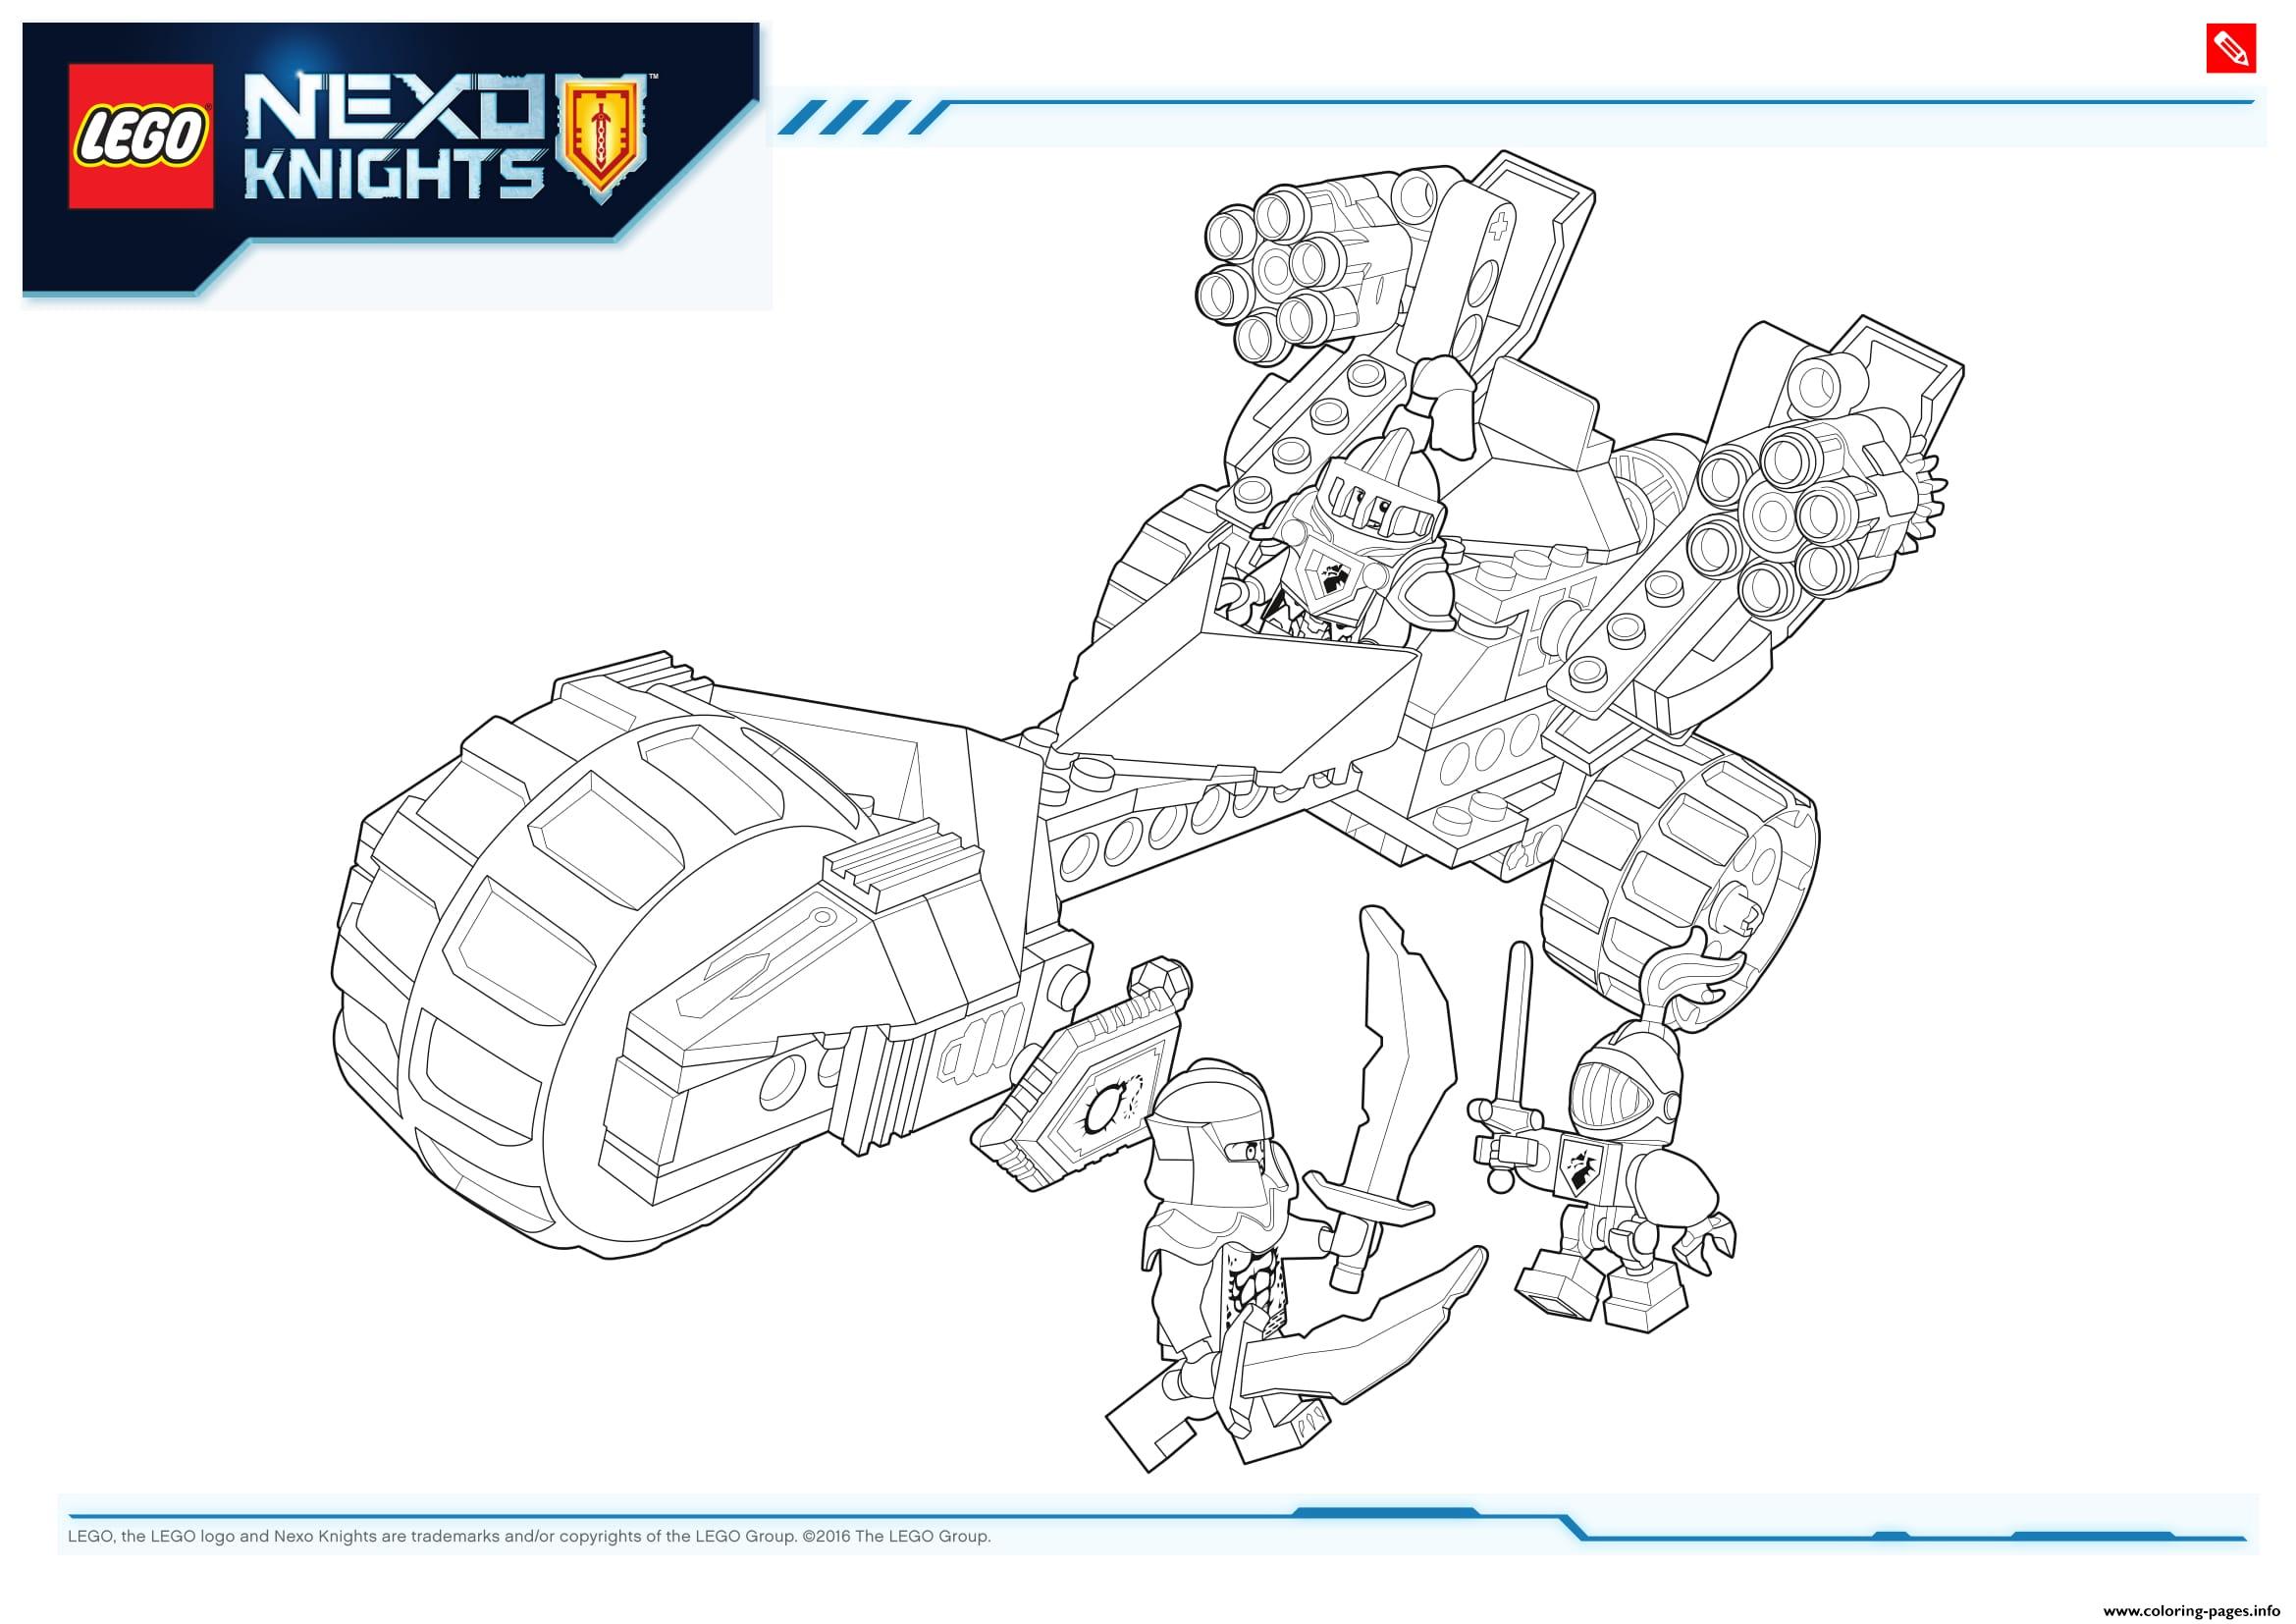 Lego NEXO KNIGHTS Products 3 coloring